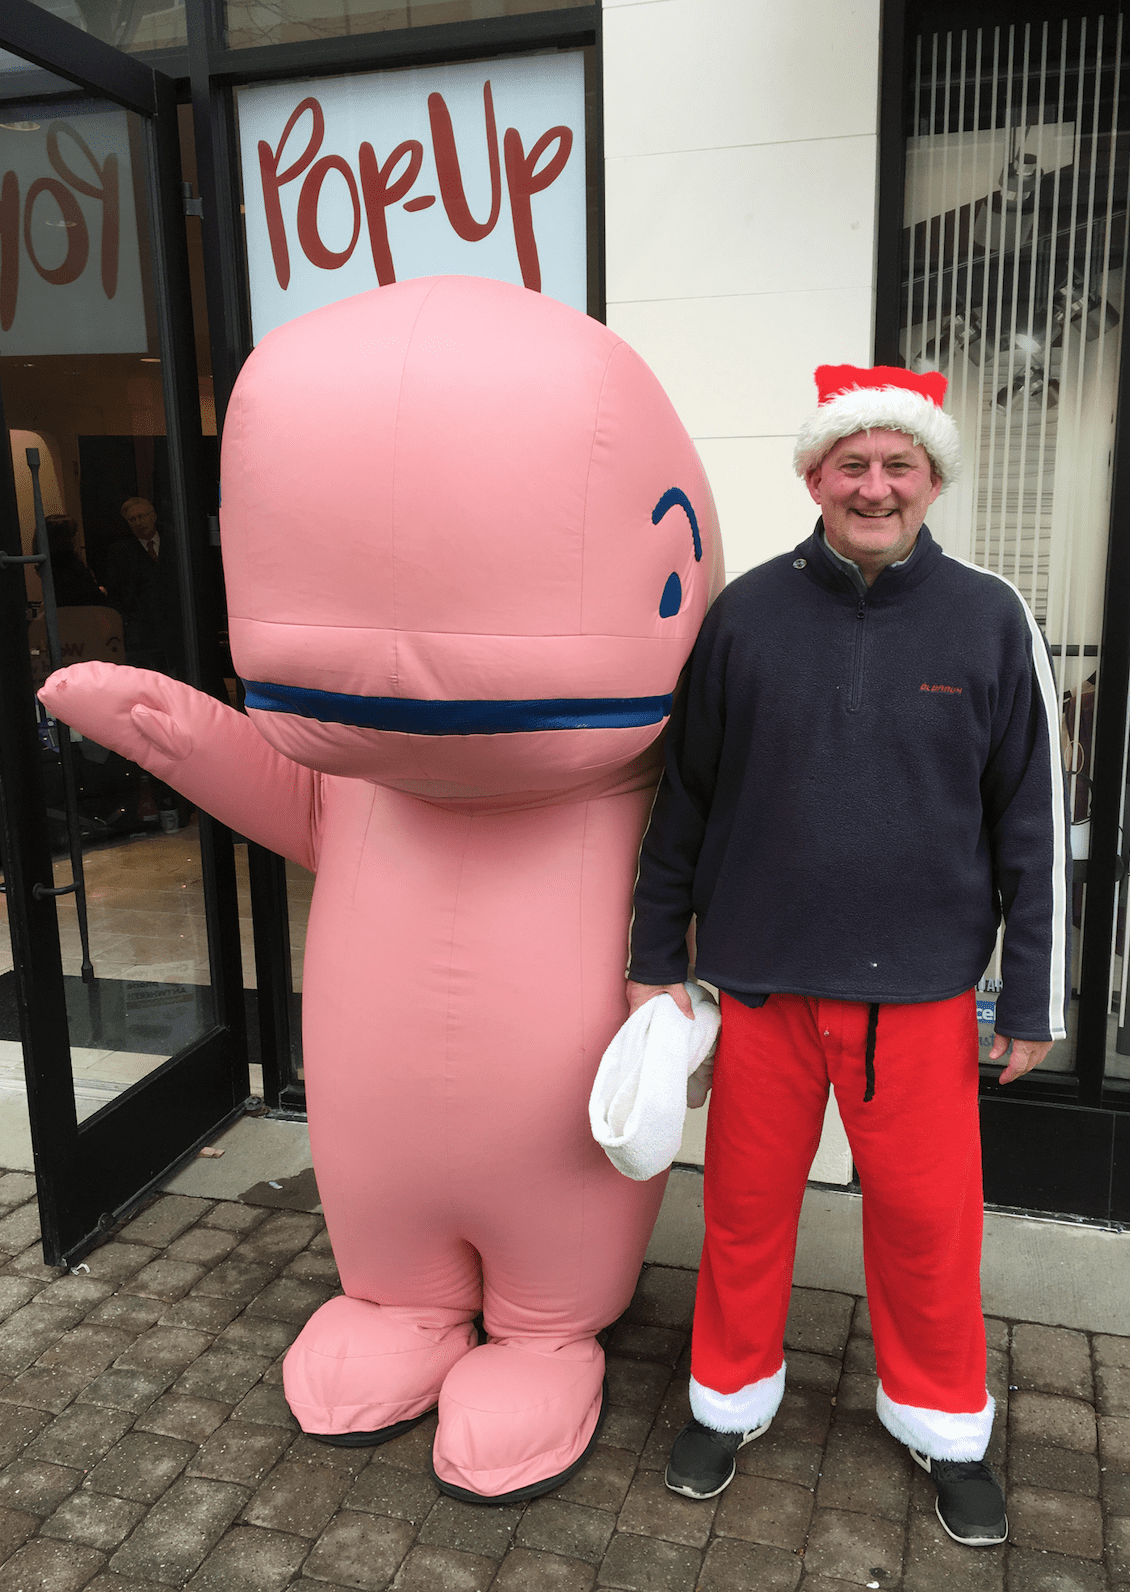 The Vineyard Vines Whale Mascot with "Santa" at the We-Ha Pop-Up Store in Blue Back Square. Photo credit: Joy Taylor